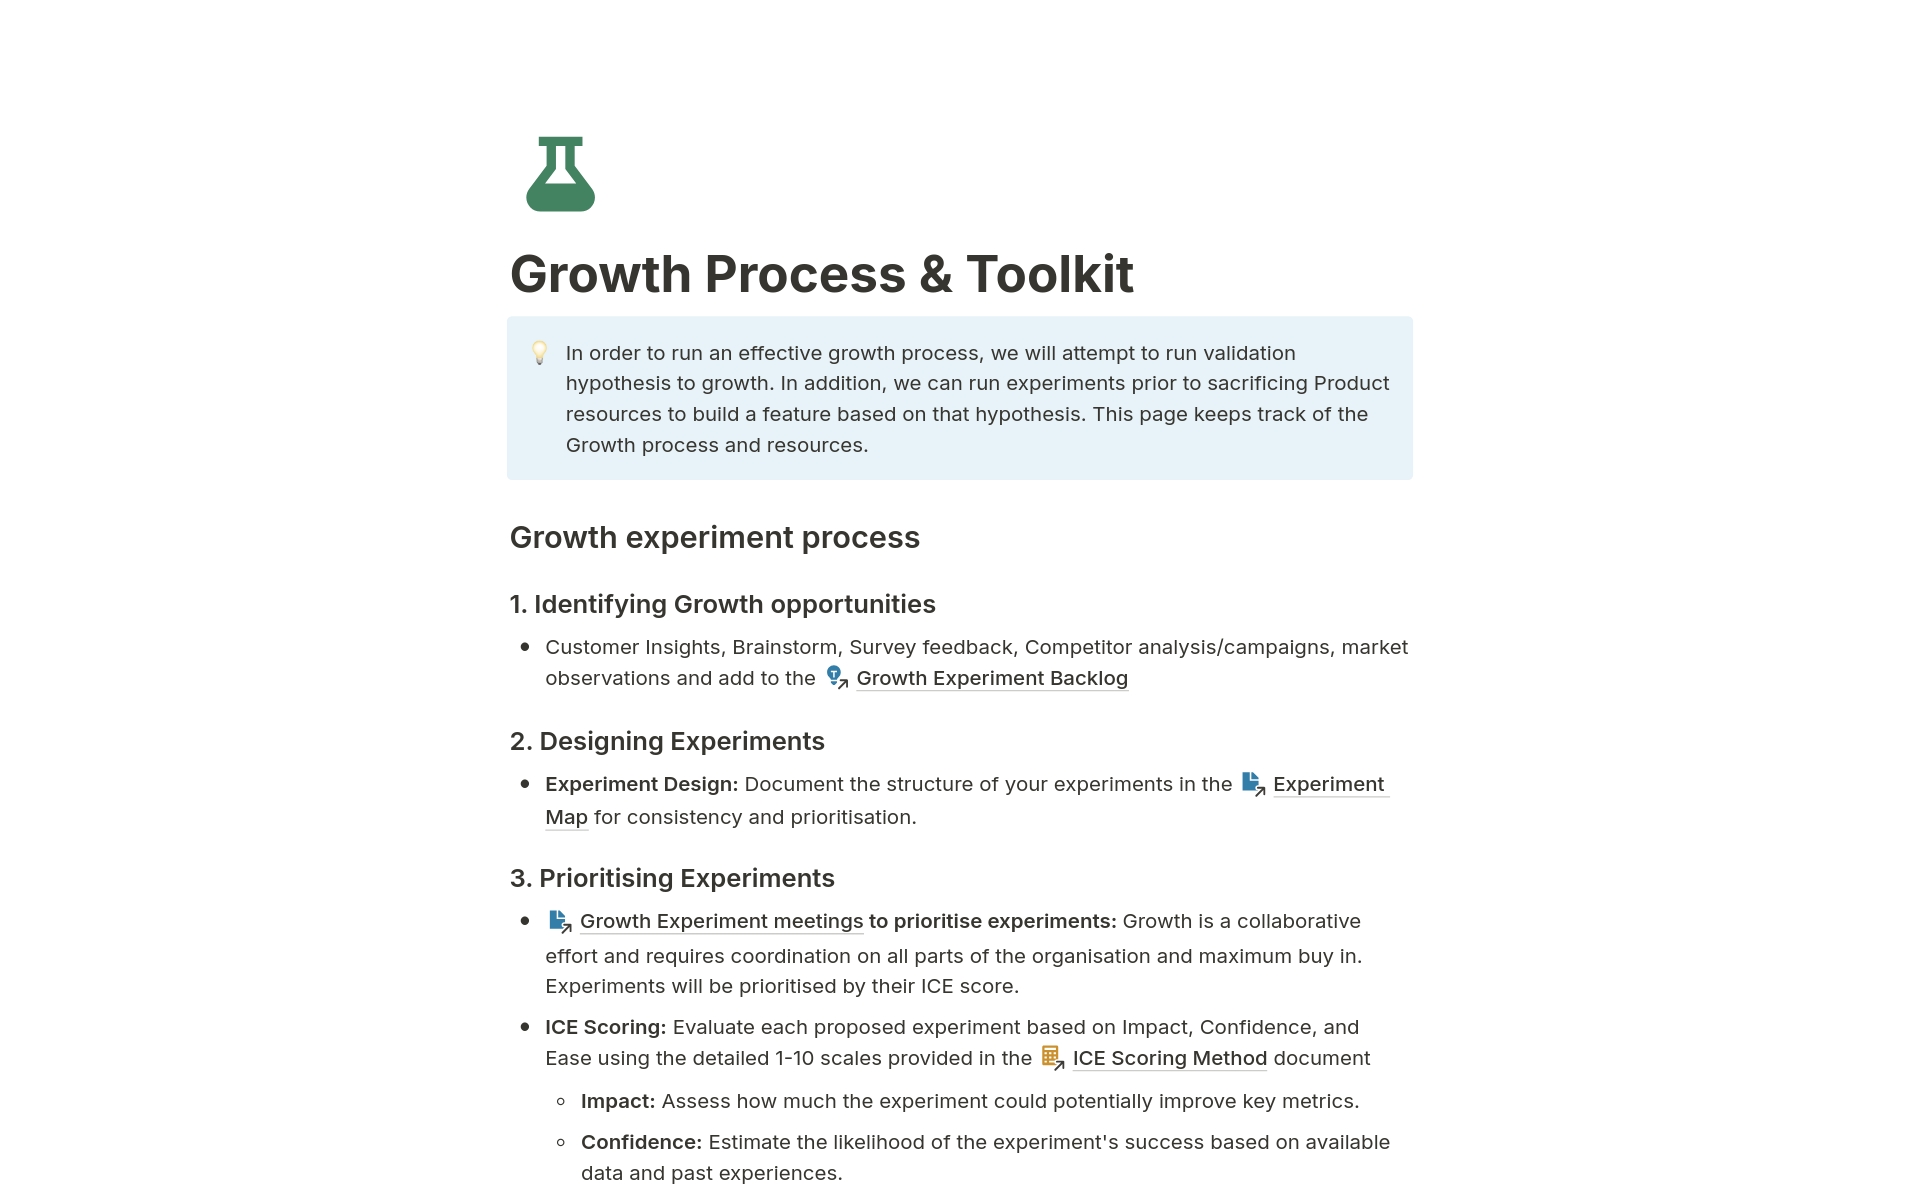 Unlock your growth potential with this comprehensive Growth Experiment Process template. Designed to streamline your marketing and product growth efforts, it covers everything from identifying opportunities, prioritizing, execution and to analyzing experiment data.  